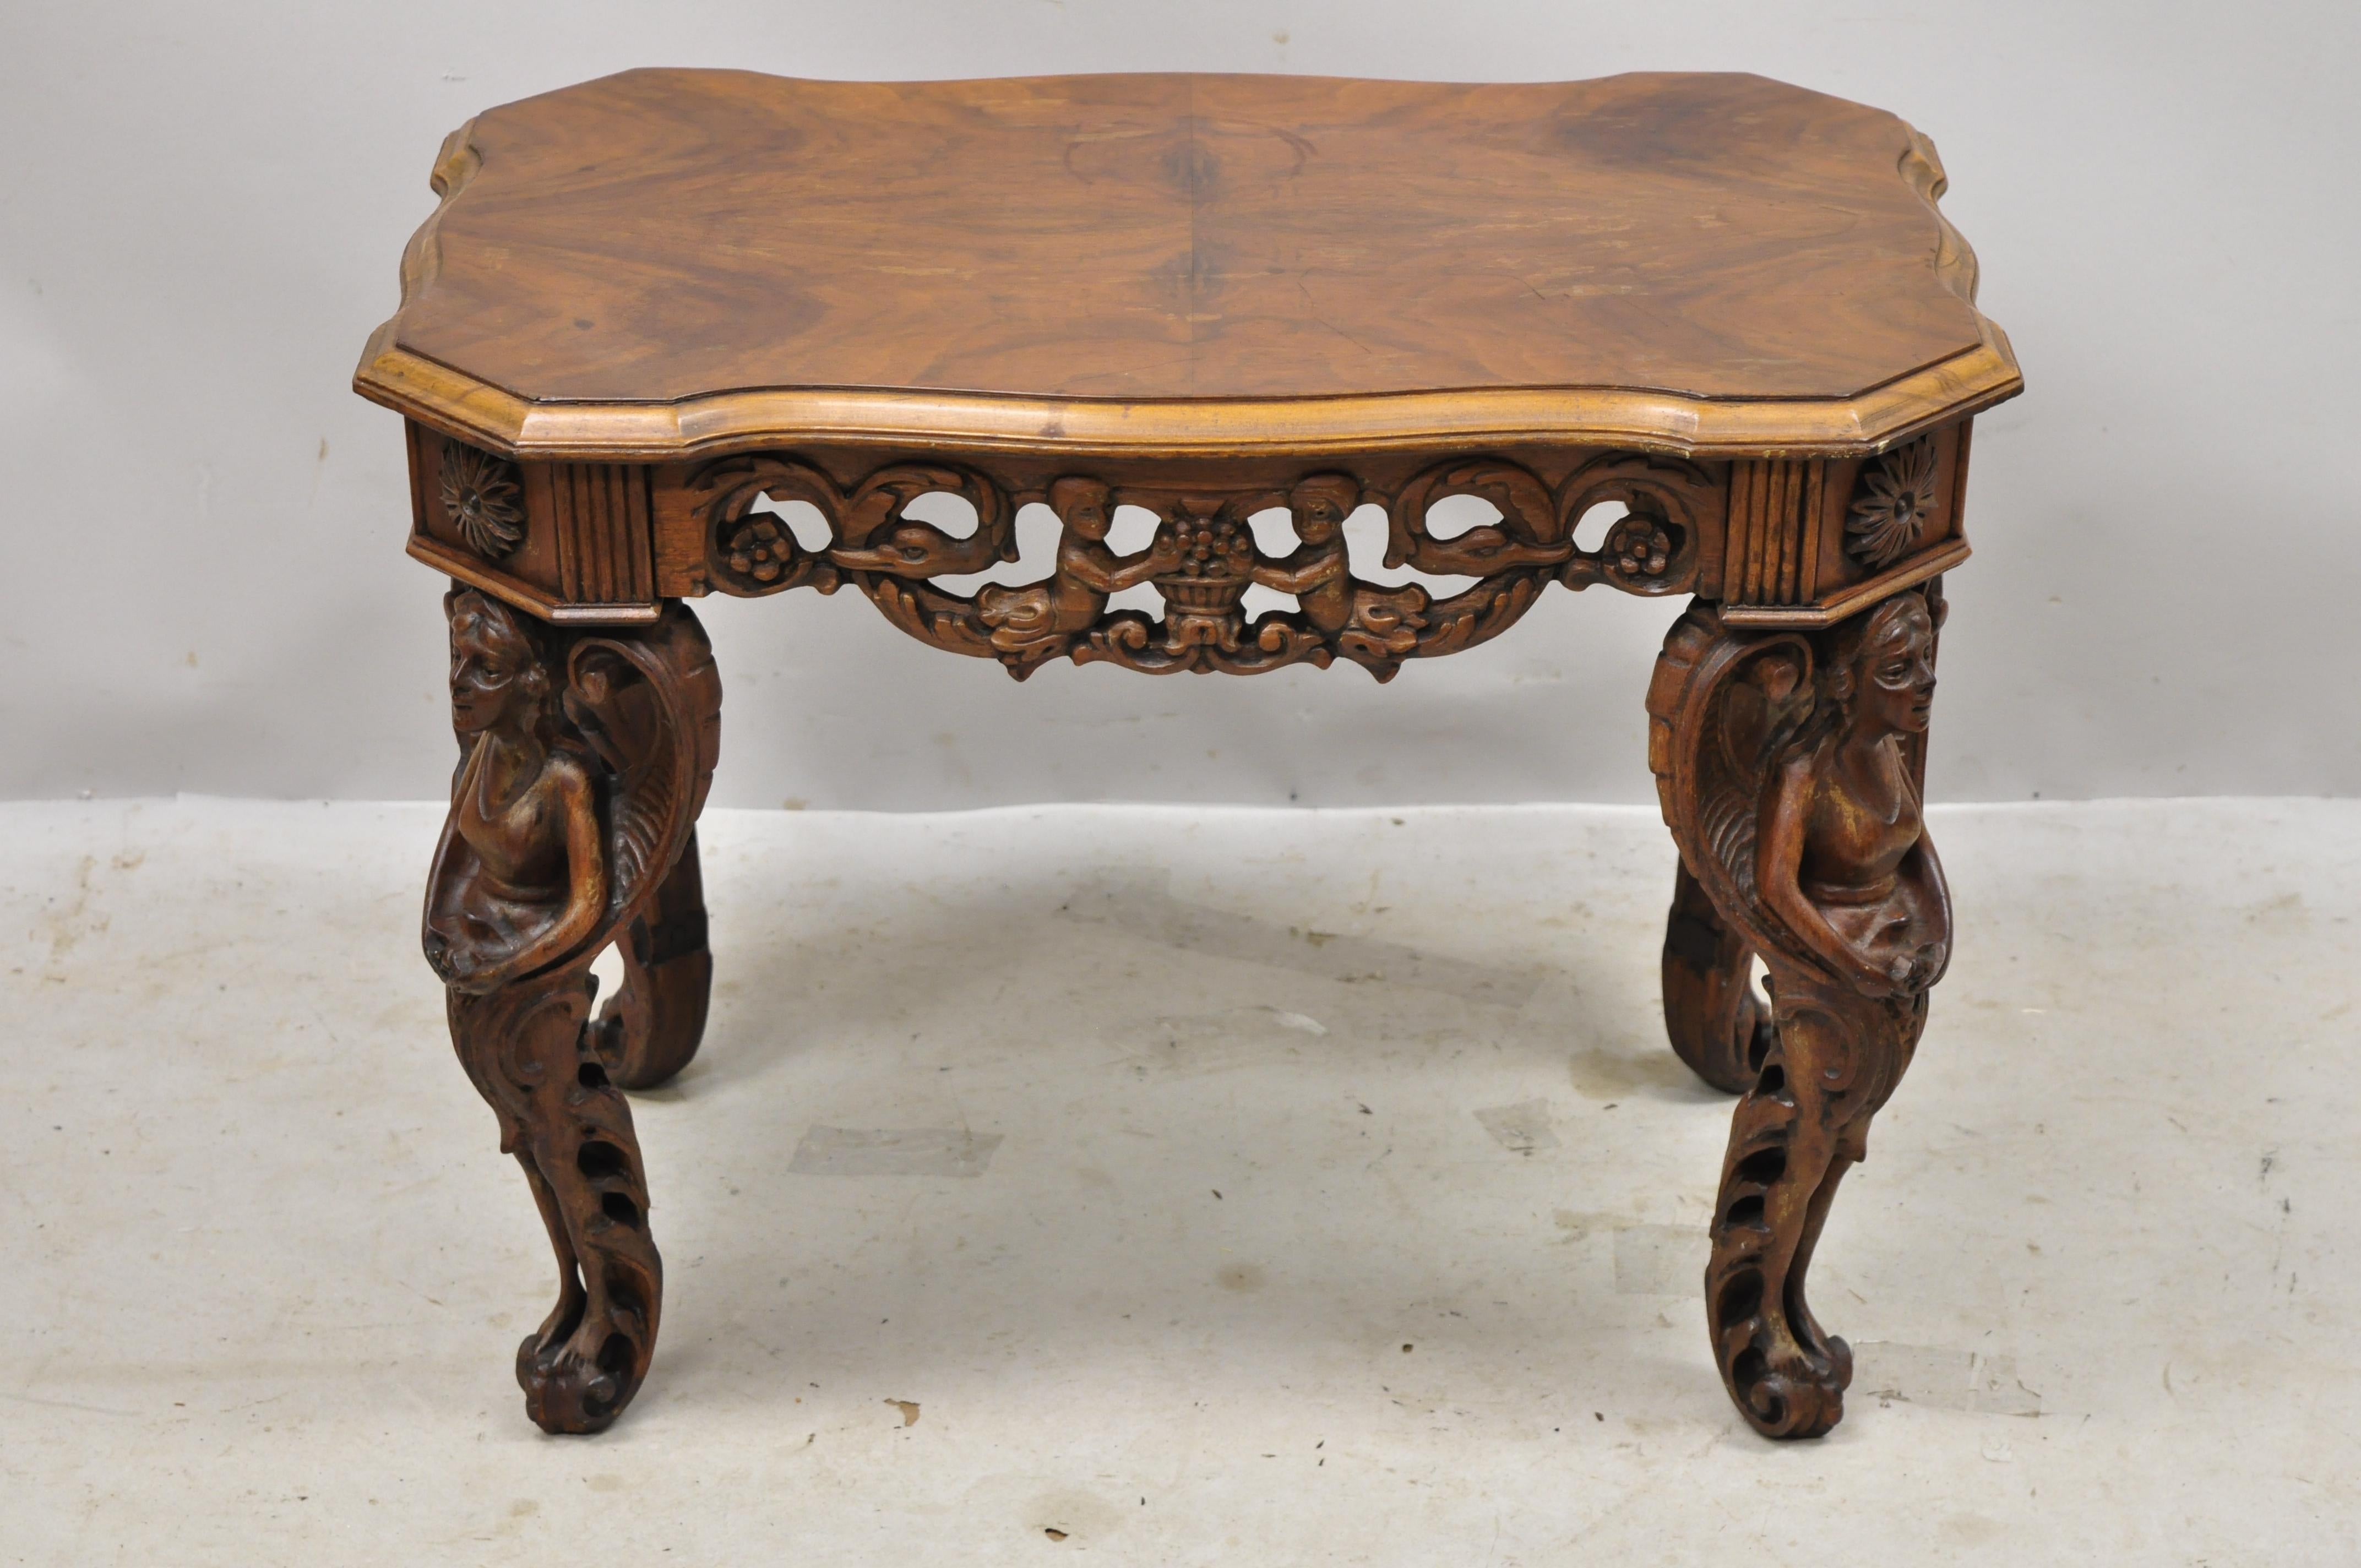 Antique carved walnut French renaissance small figural coffee table with winged maidens. Item features full figured winged maiden legs, shaped top, beautiful wood grain, very nice antique item, great style and form, Circa early to mid-1900s.